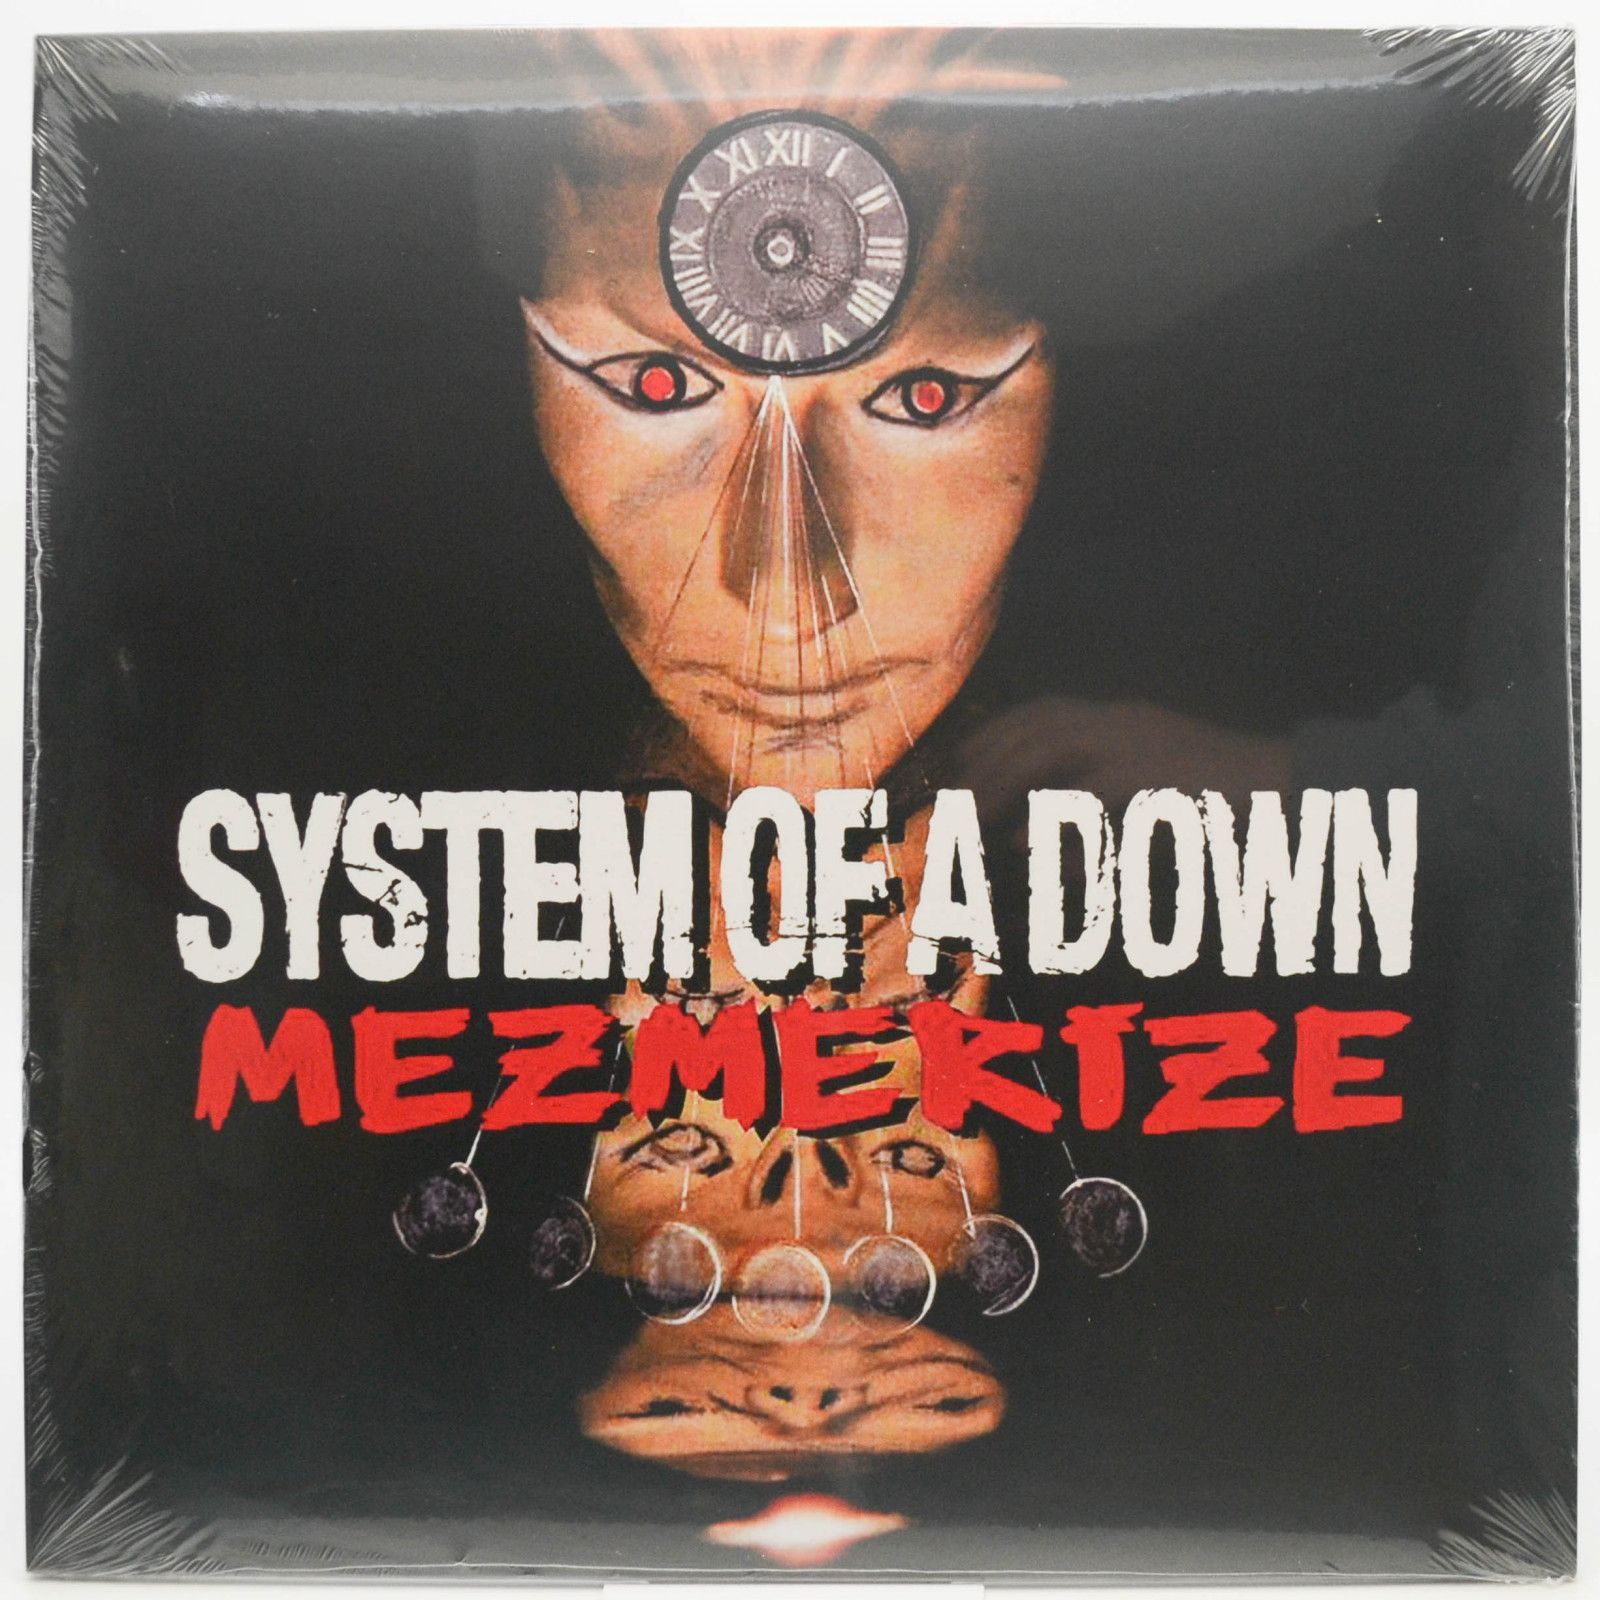 System Of A Down — Mezmerize, 2005